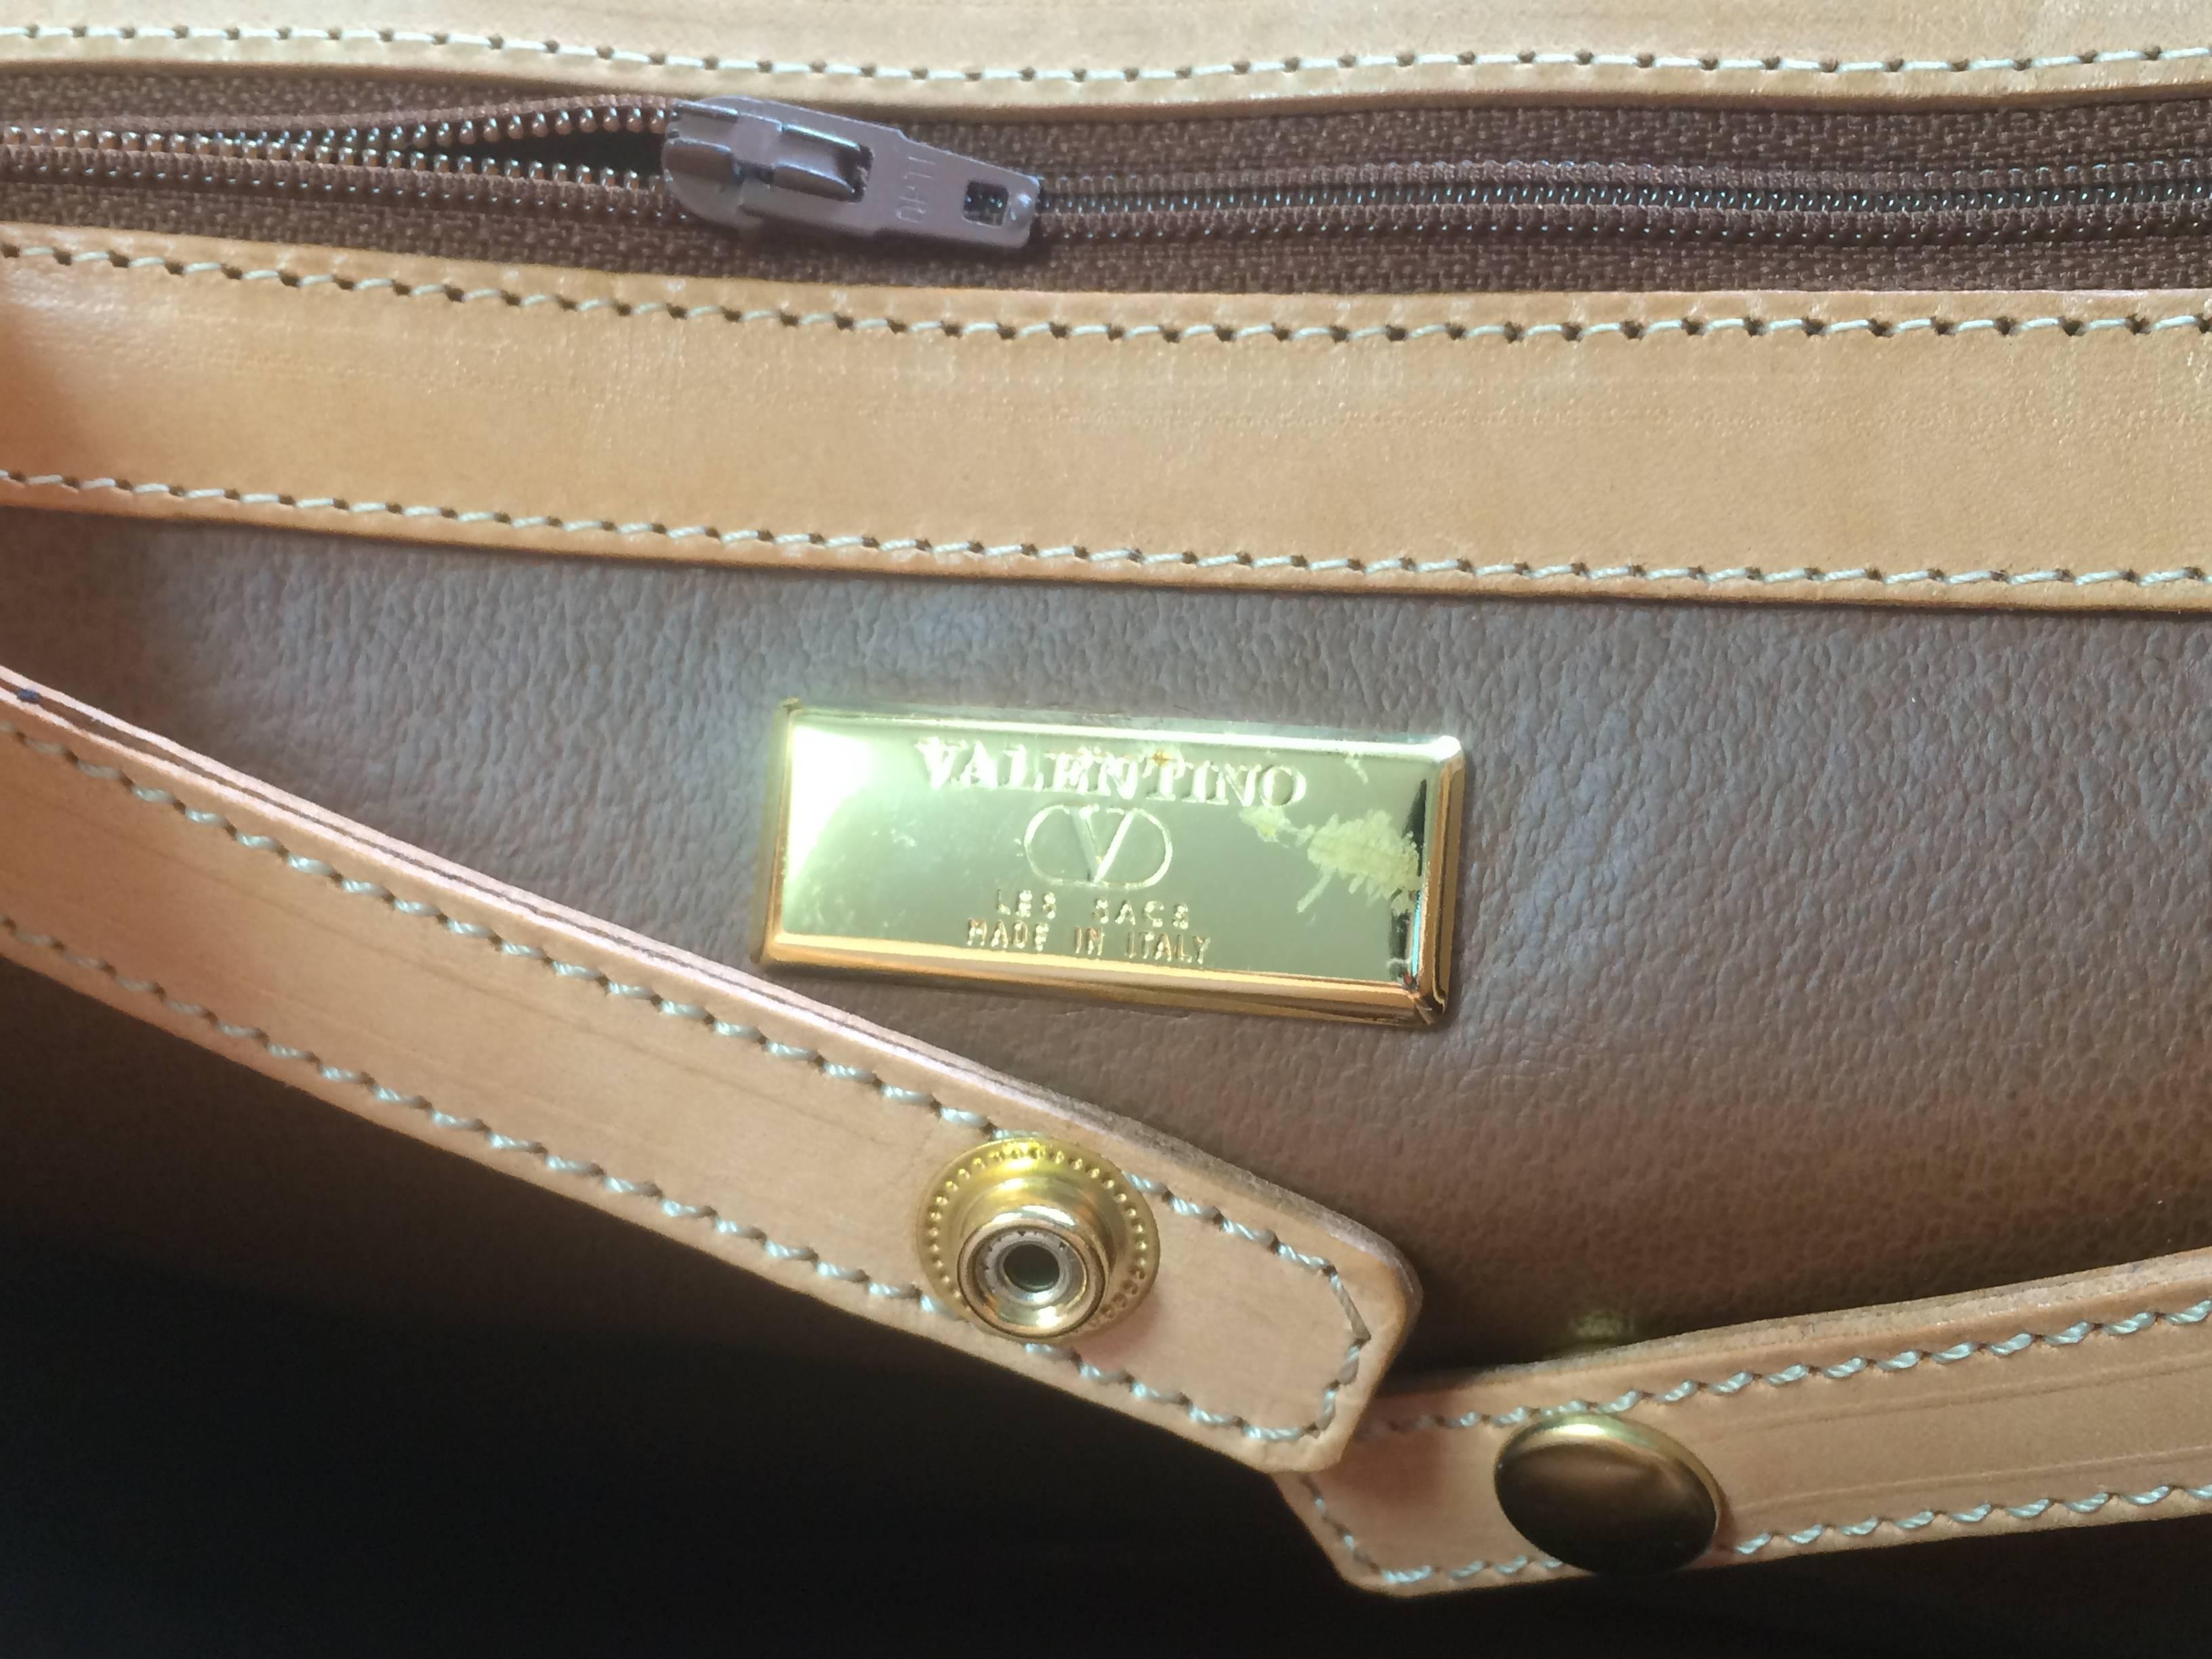 Vintage VALENTINO beige and brown shoulder handbag with leather handle and logo In Excellent Condition For Sale In Kashiwa, Chiba